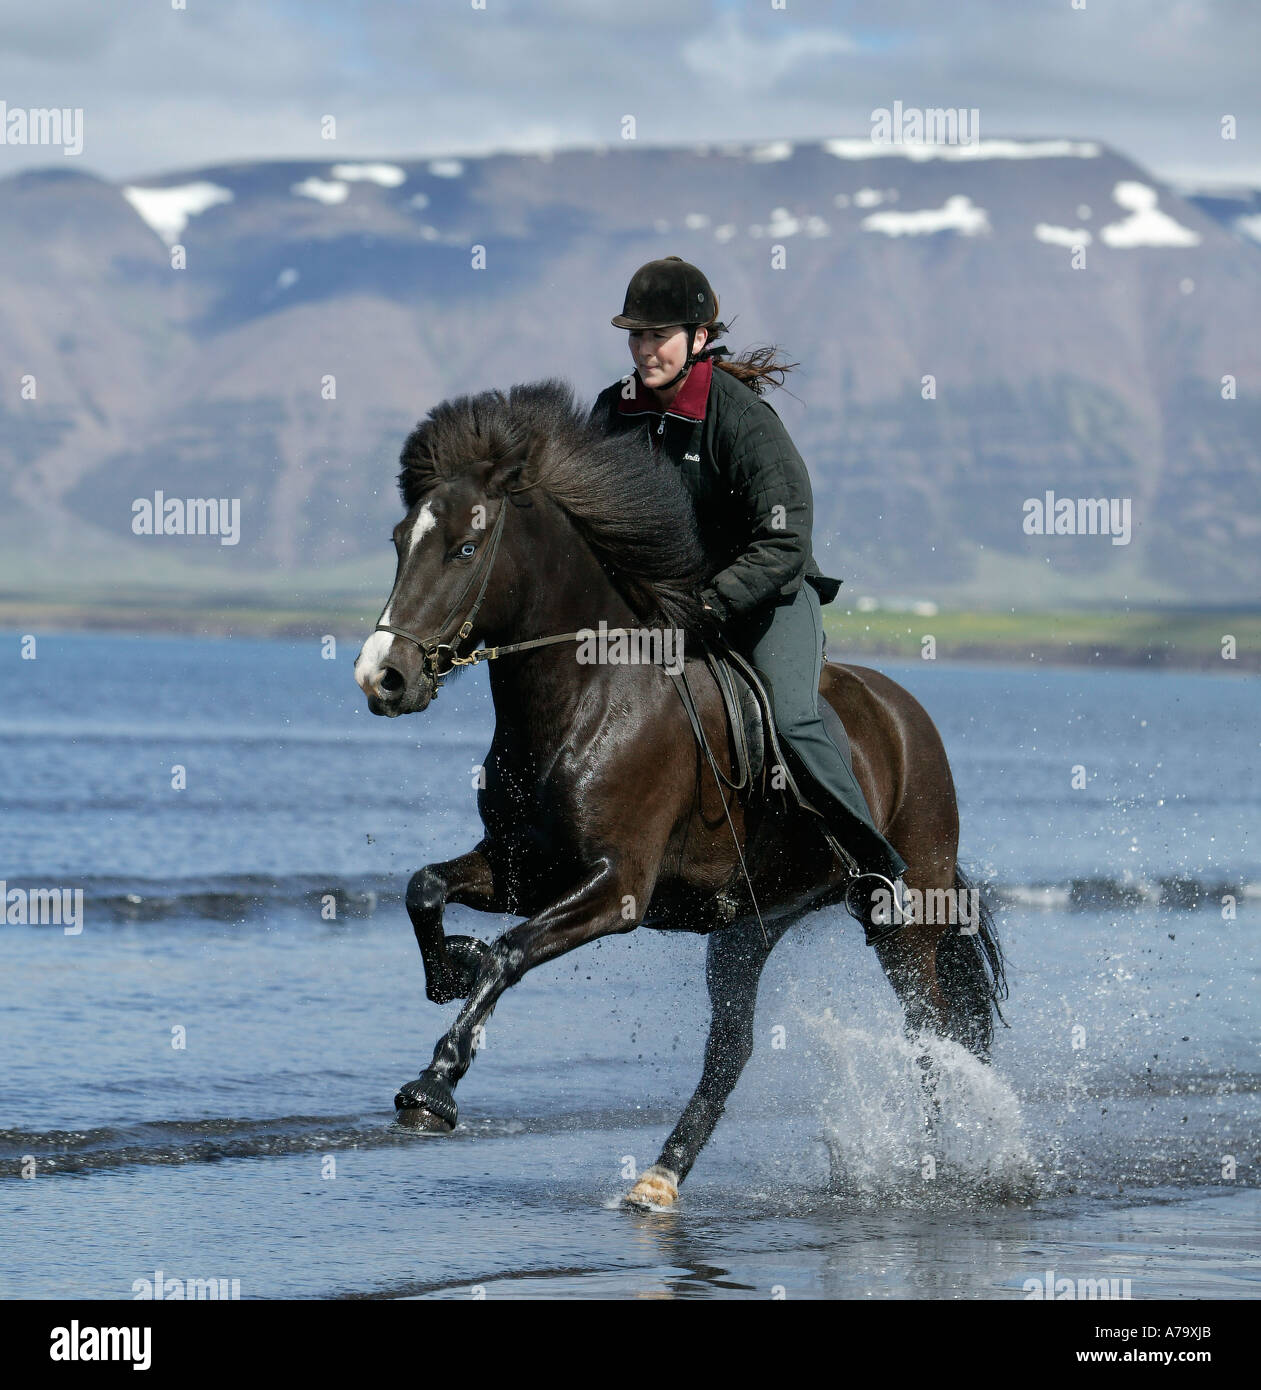 Icelandic Horse with Rider running in water, Iceland Stock Photo